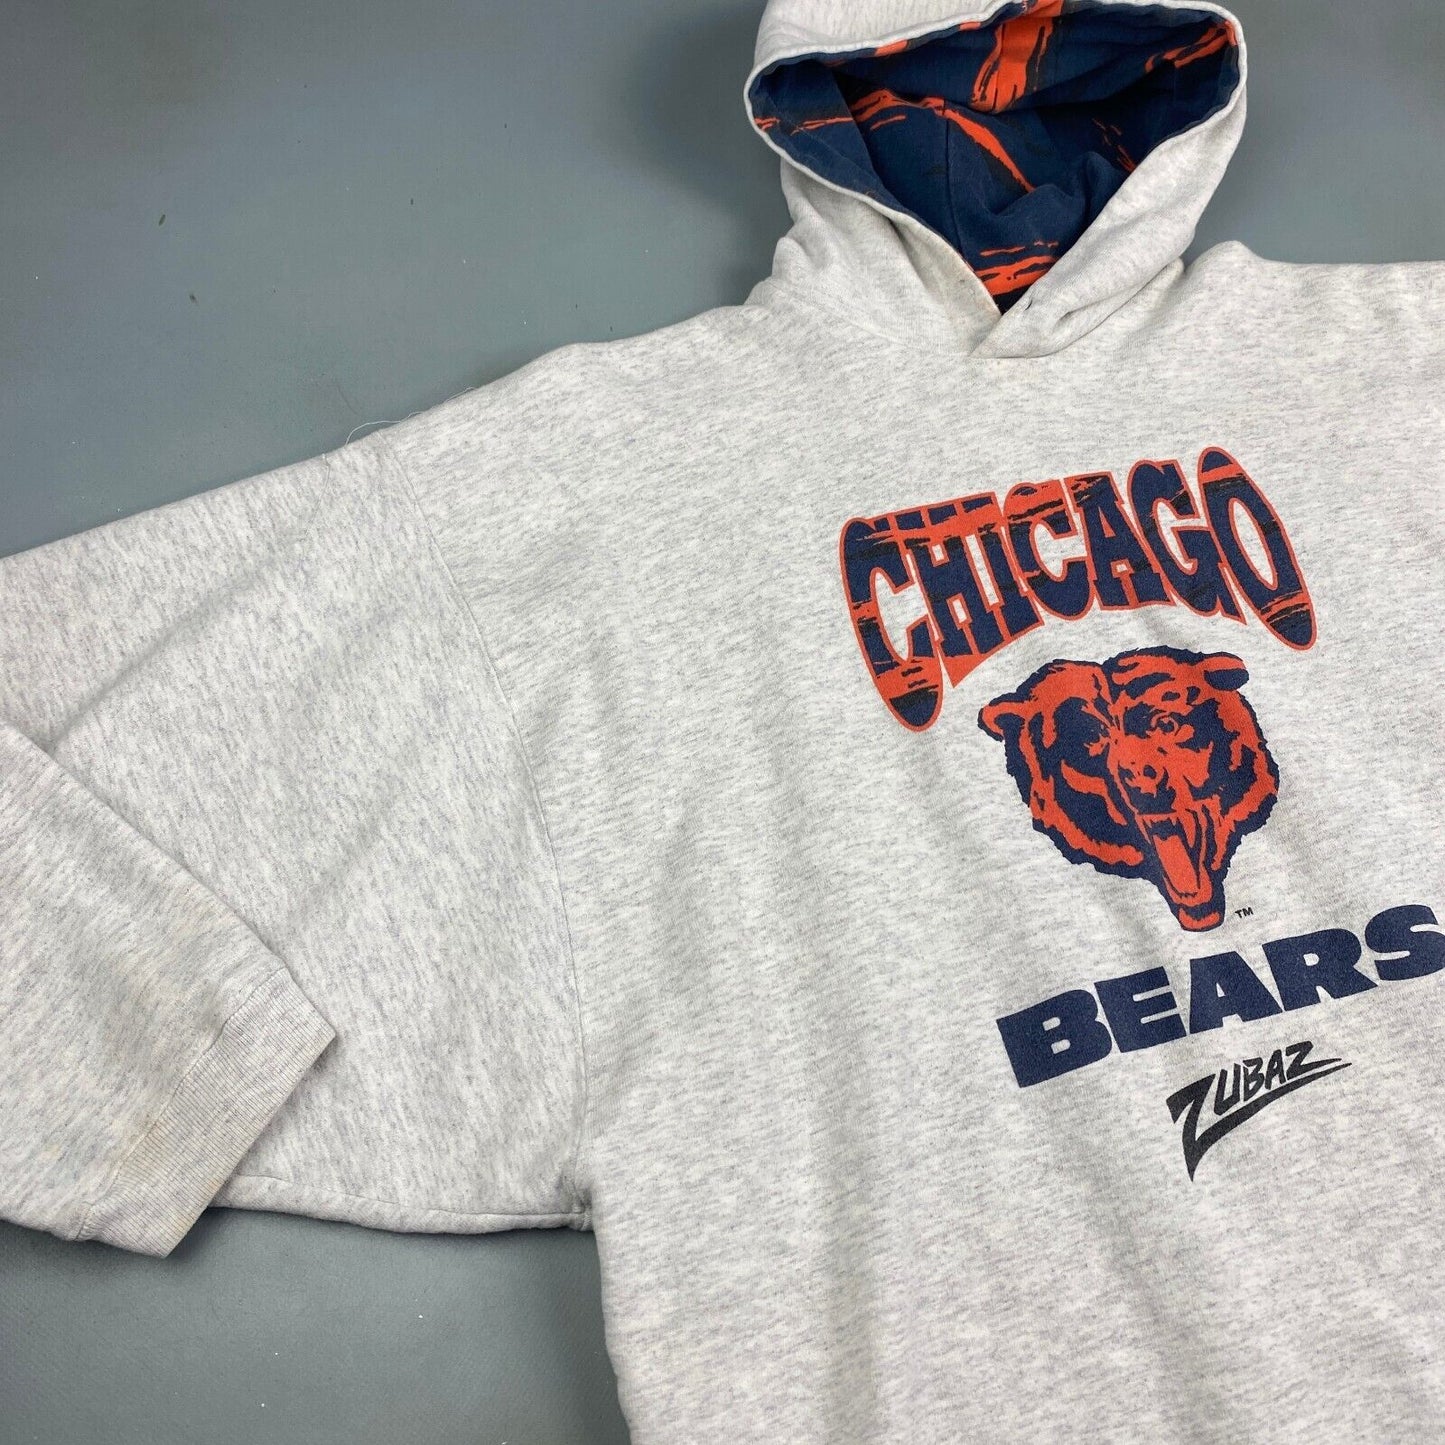 VINTAGE 90s Chicago Bears Zubaz Grey Hoodie Sweater sz XL Mens Made in USA